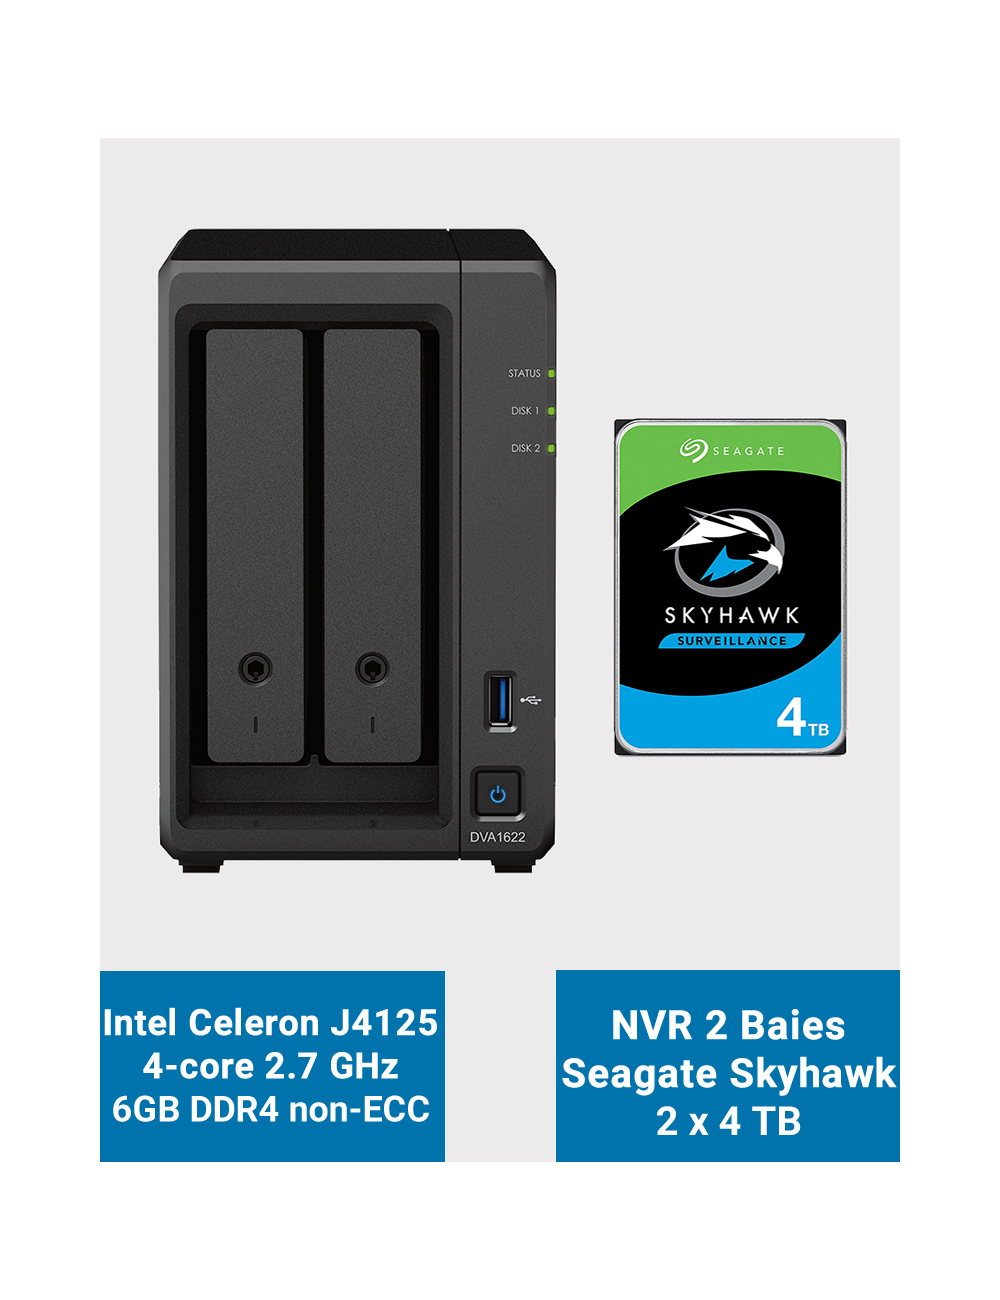 Synology DVA1622 Network Video Recorder SKYHAWK 8To (2x4To)